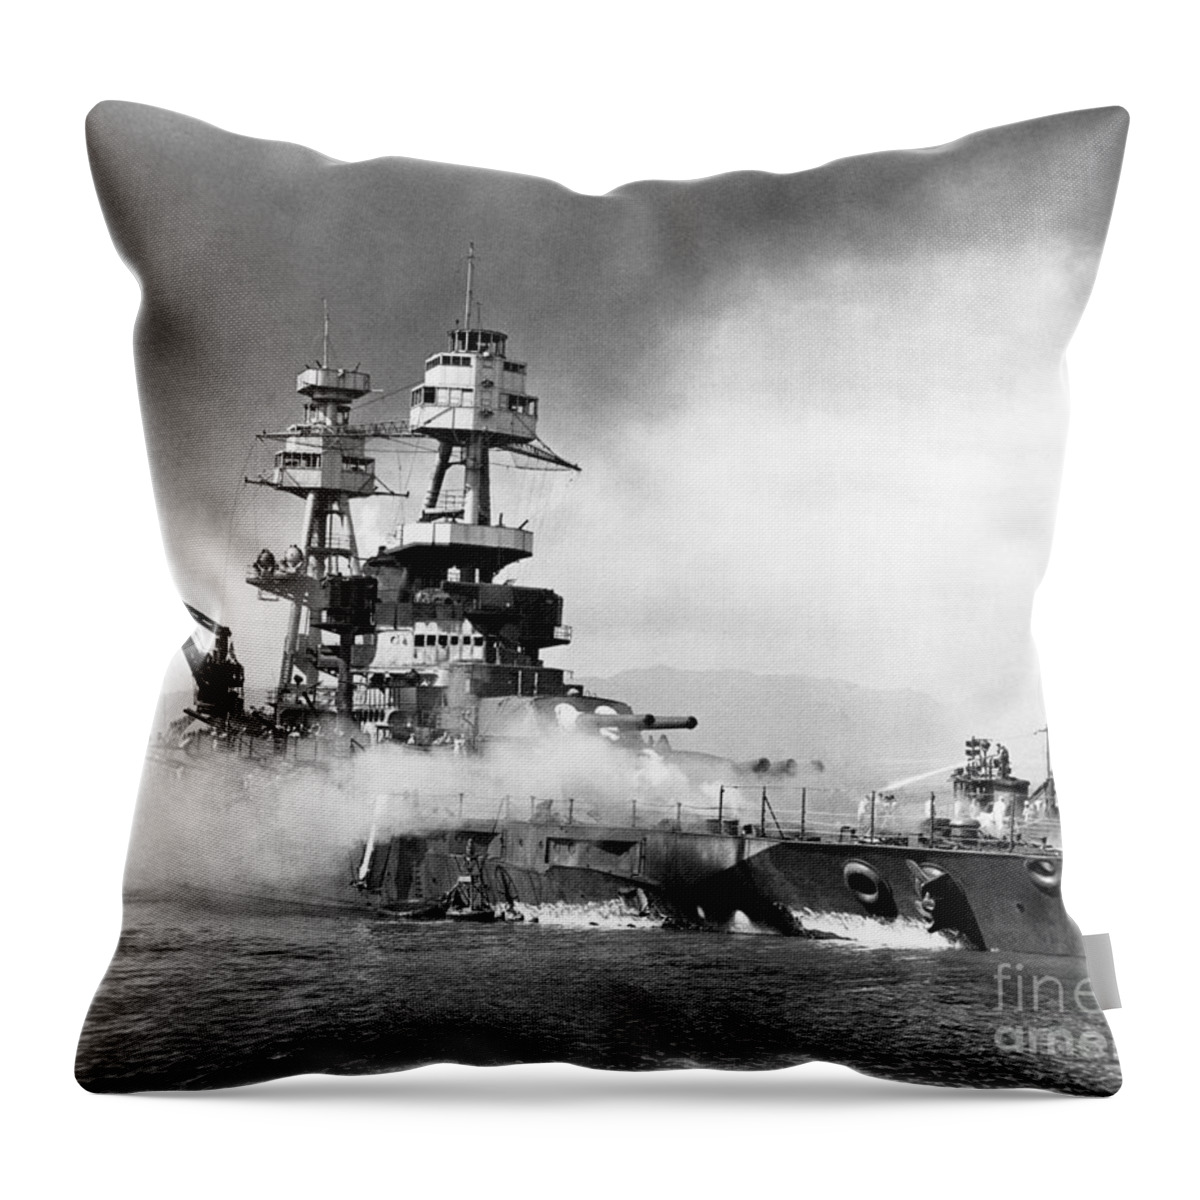 1941 Throw Pillow featuring the photograph Uss Nevada, 1941 by Granger